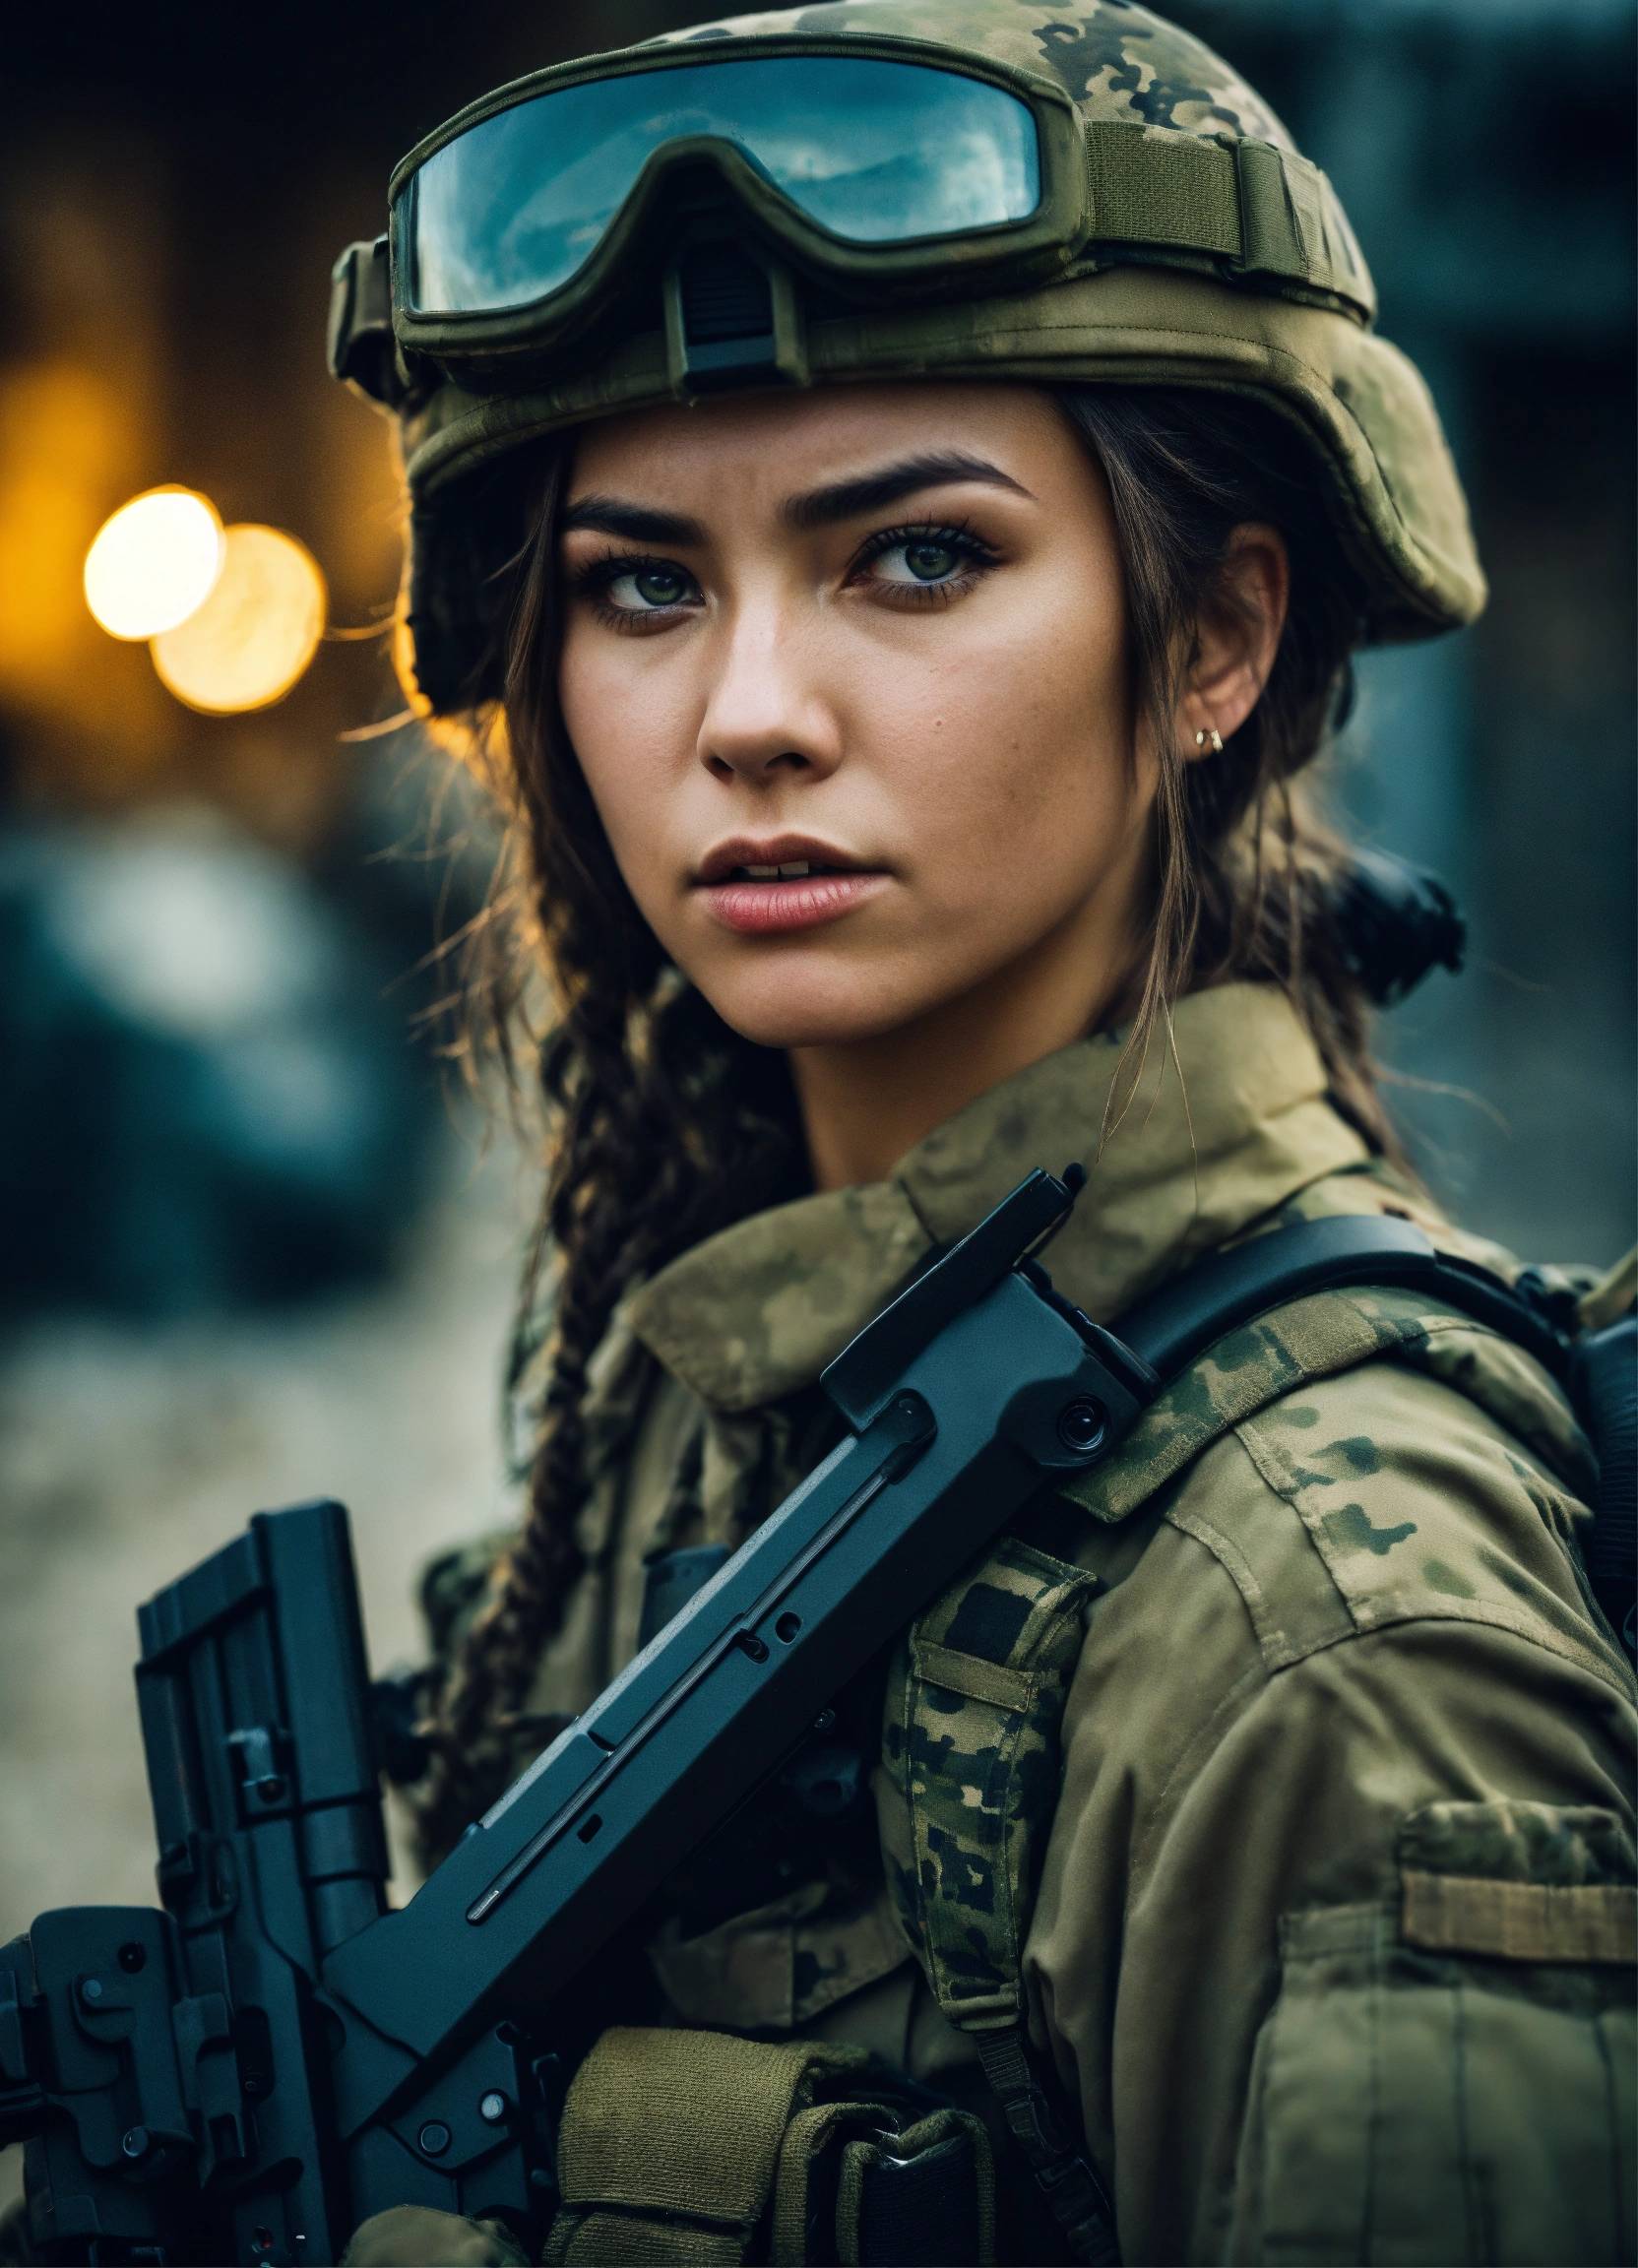 Lexica - A beautiful soldier girl wearing camouflage military equipment ...